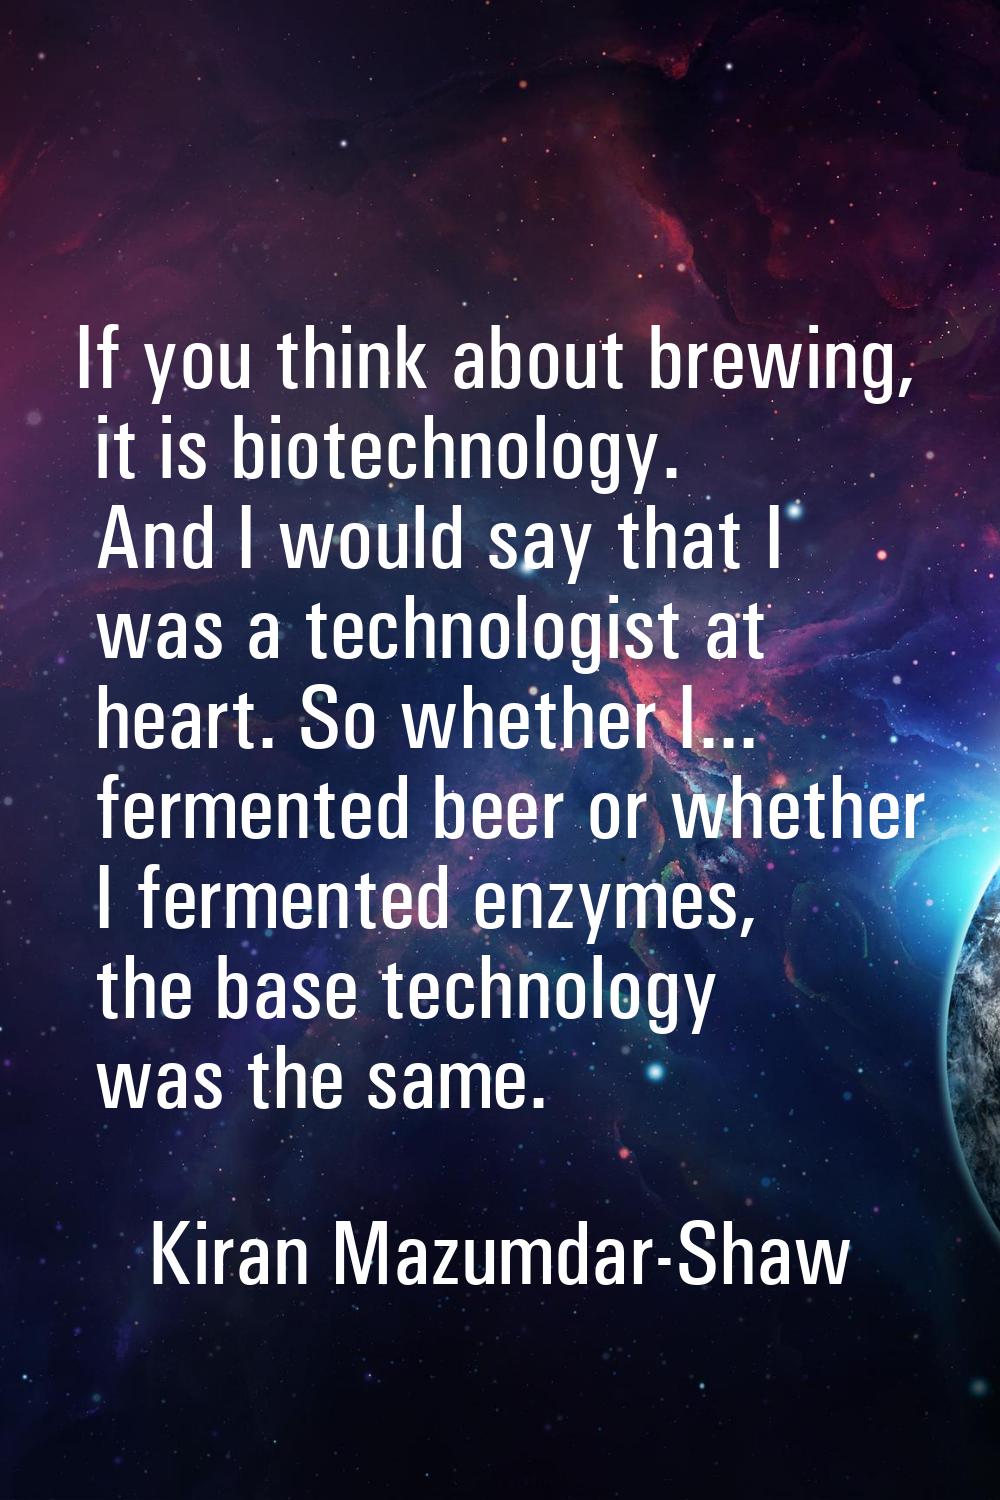 If you think about brewing, it is biotechnology. And I would say that I was a technologist at heart